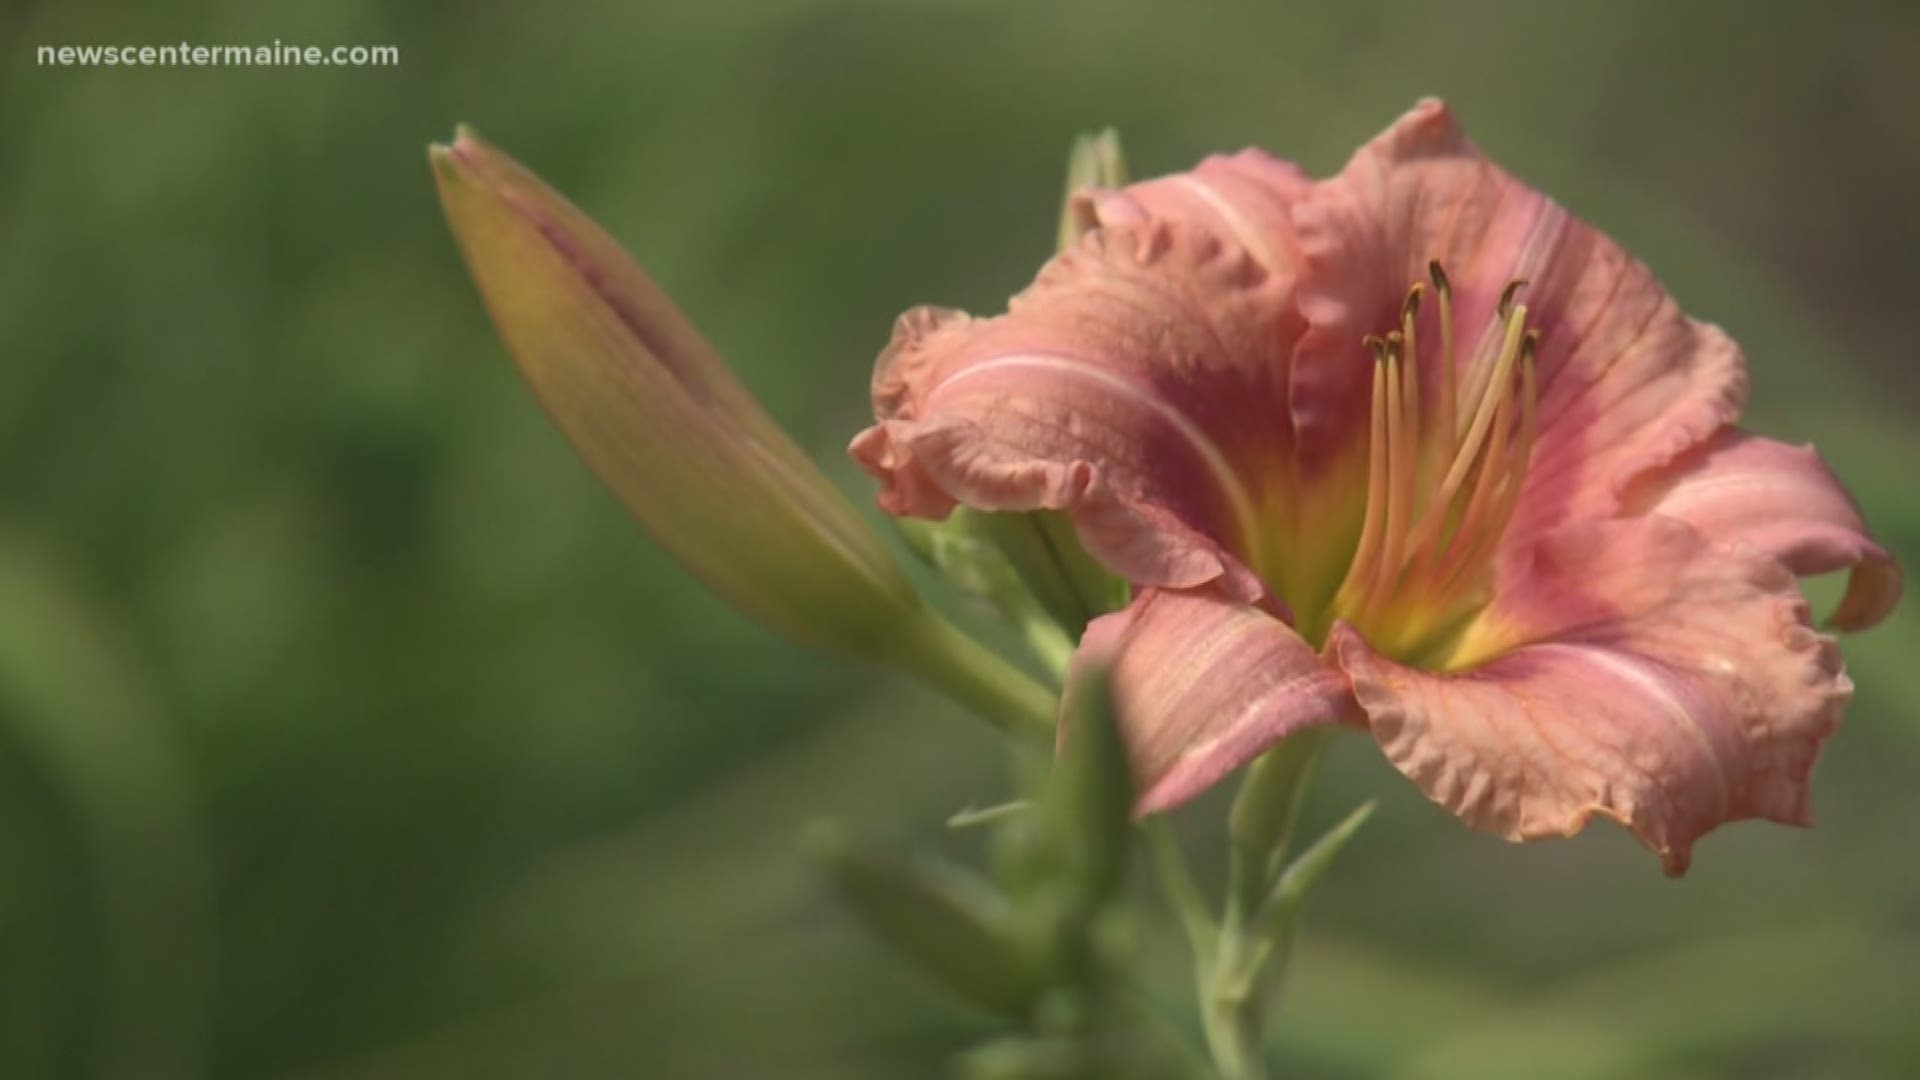 Jeff O’Donal of O’Donal’s Nurseries in Gorham talks with NEWS CENTER Maine's Cindy Williams about daylilies that constantly bloom